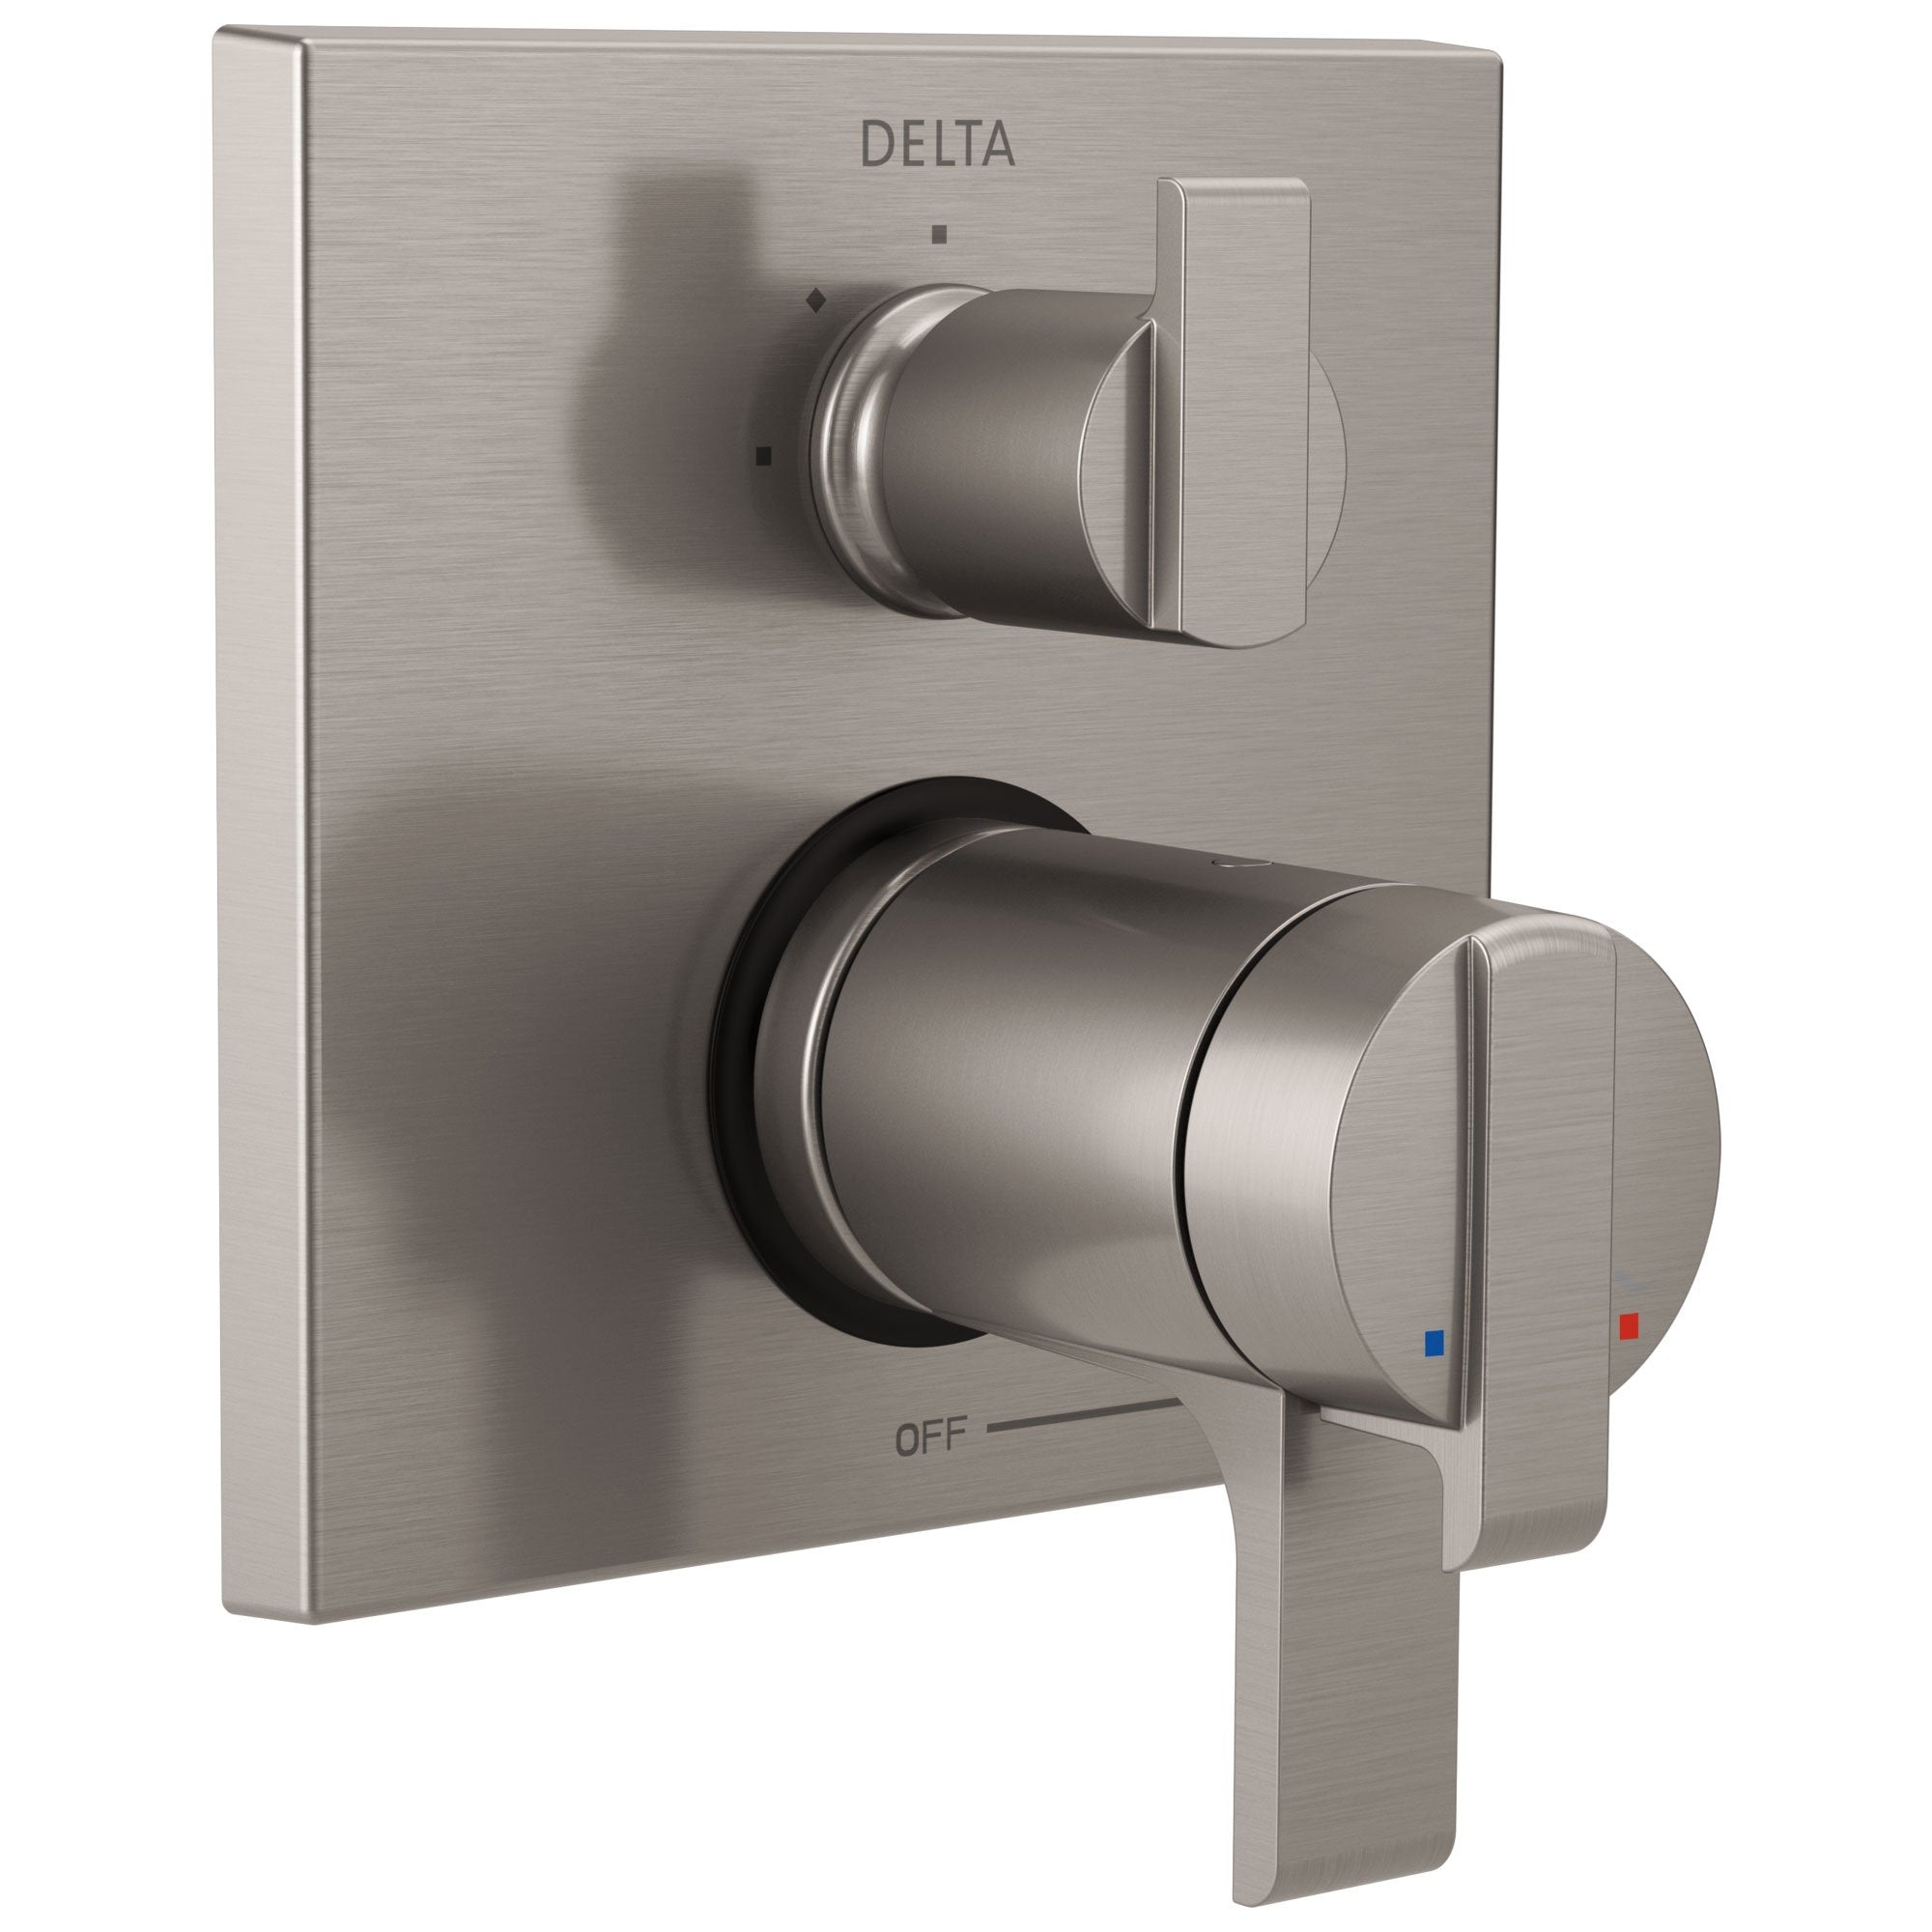 Delta Ara Stainless Steel Finish Thermostatic Shower Faucet Control with 3-Setting Integrated Diverter Includes Trim Kit and Rough-in Valve with Stops D2131V